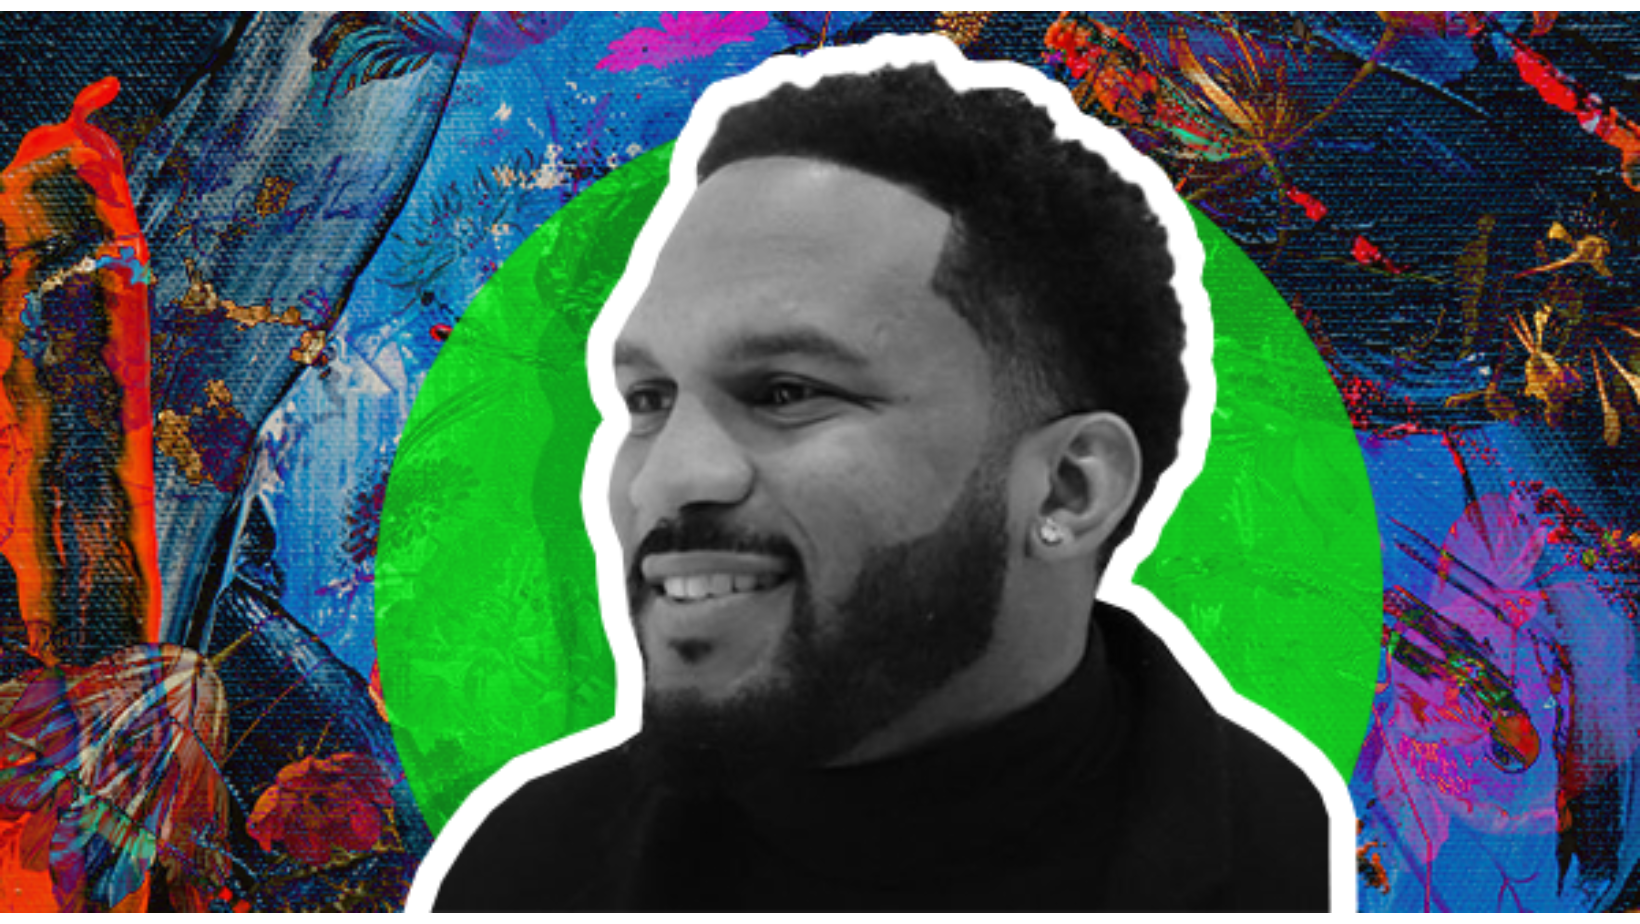 A black and white photo of Kickstarter CEO Everette Taylor is shown over a blue and red oil painting background.